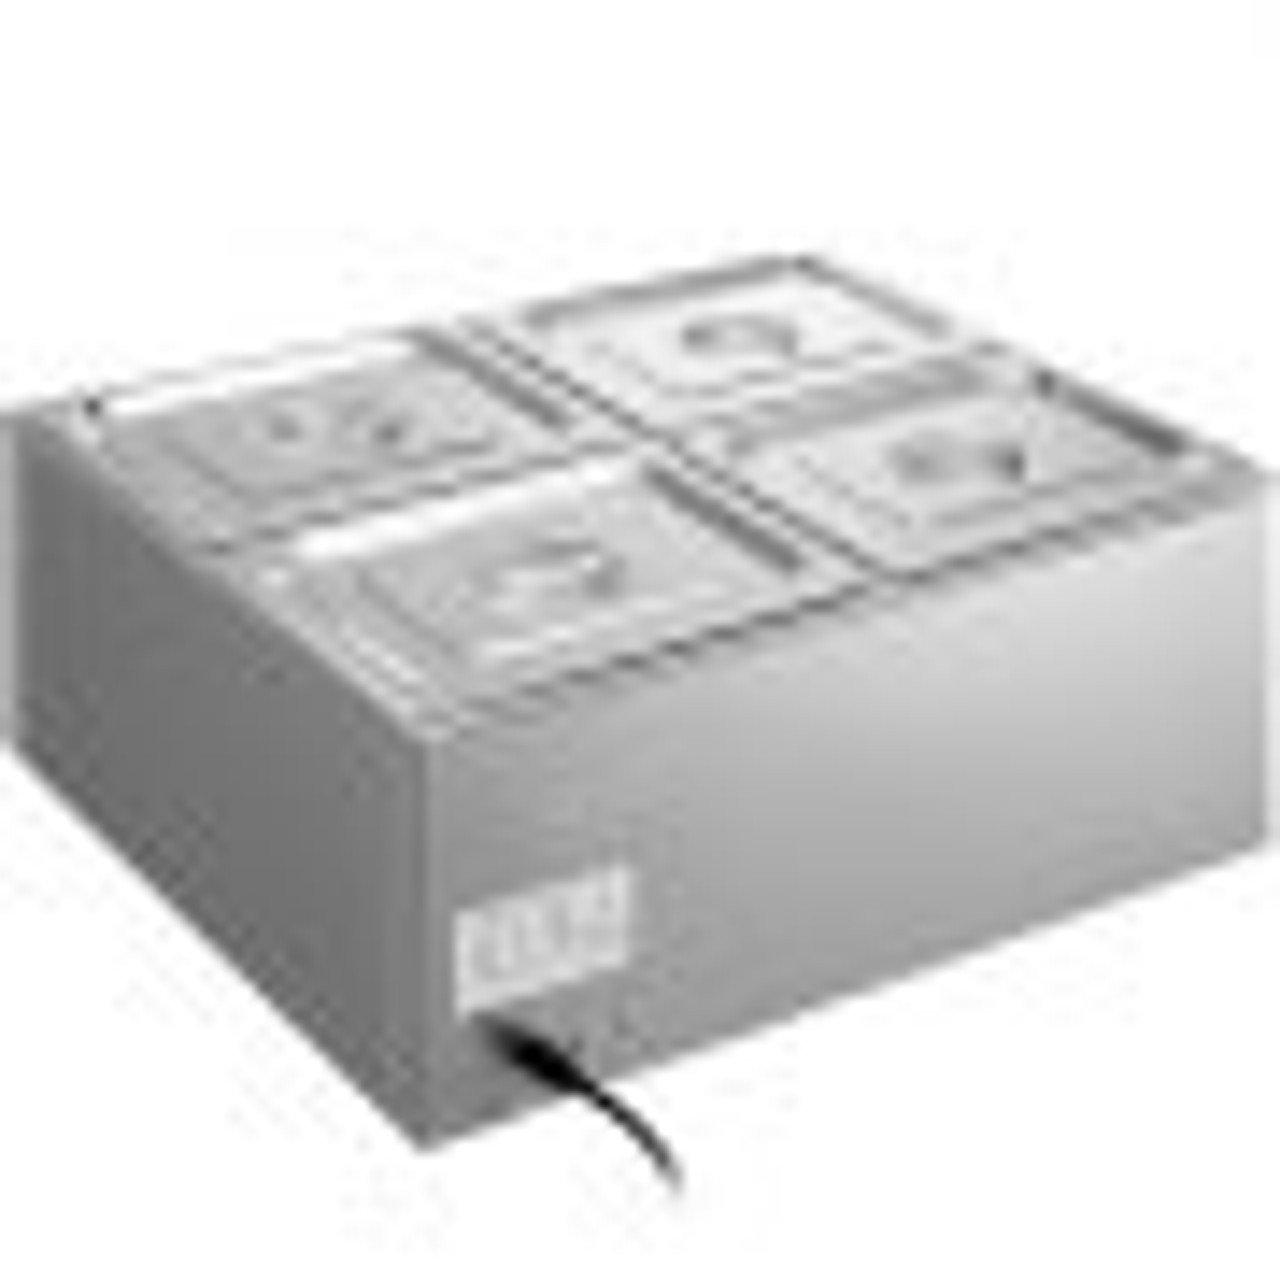 110V 4-Pan Commercial Food Warmer, 1200W Electric Steam Table 15cm/6inch Deep, Professional Stainless Steel Buffet Bain Marie 34 Quart for Catering and Restaurants